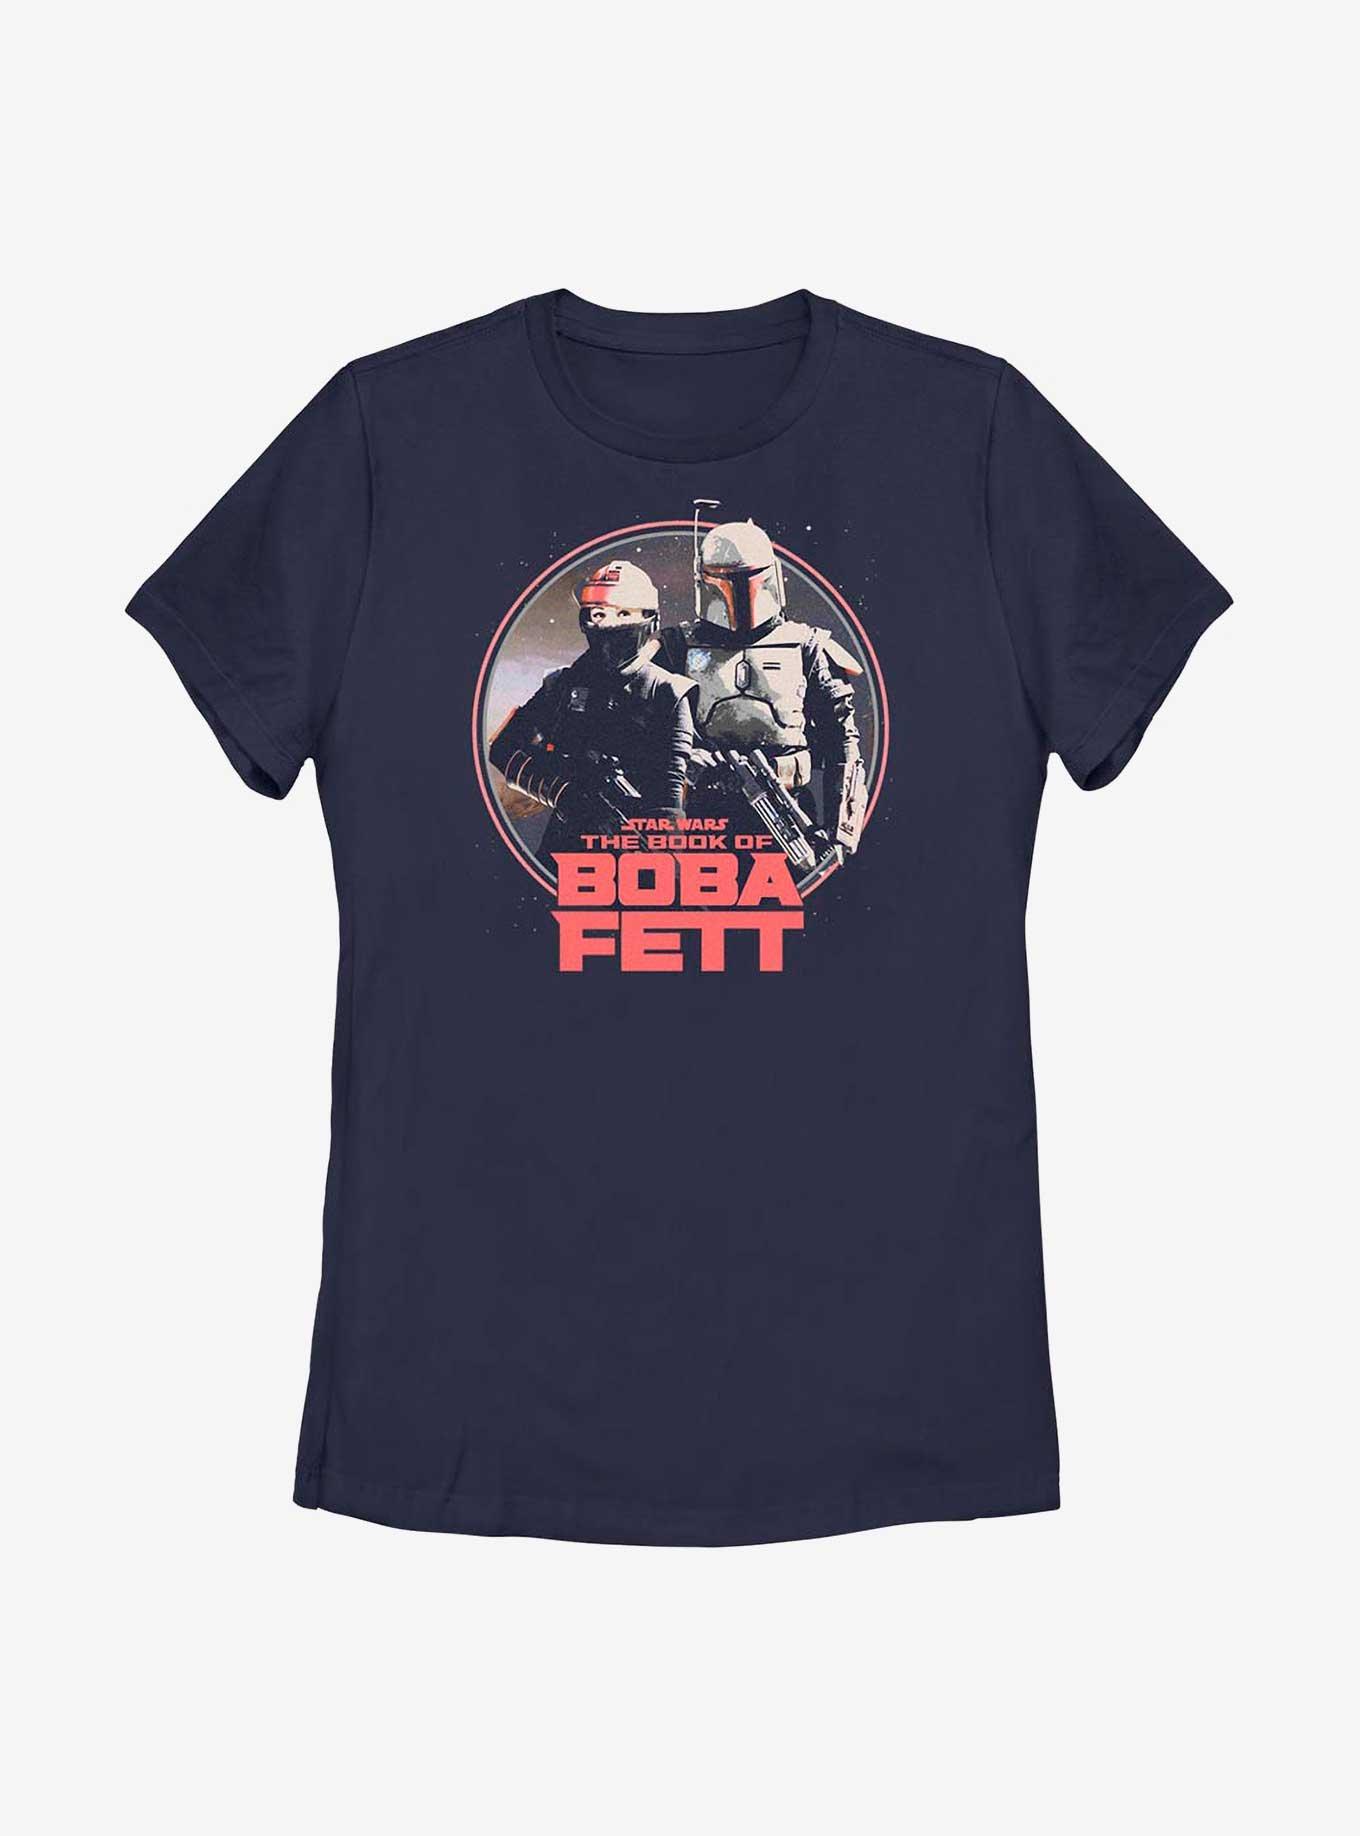 Star Wars Book Of Boba Fett Stand Your Ground Womens T-Shirt, NAVY, hi-res